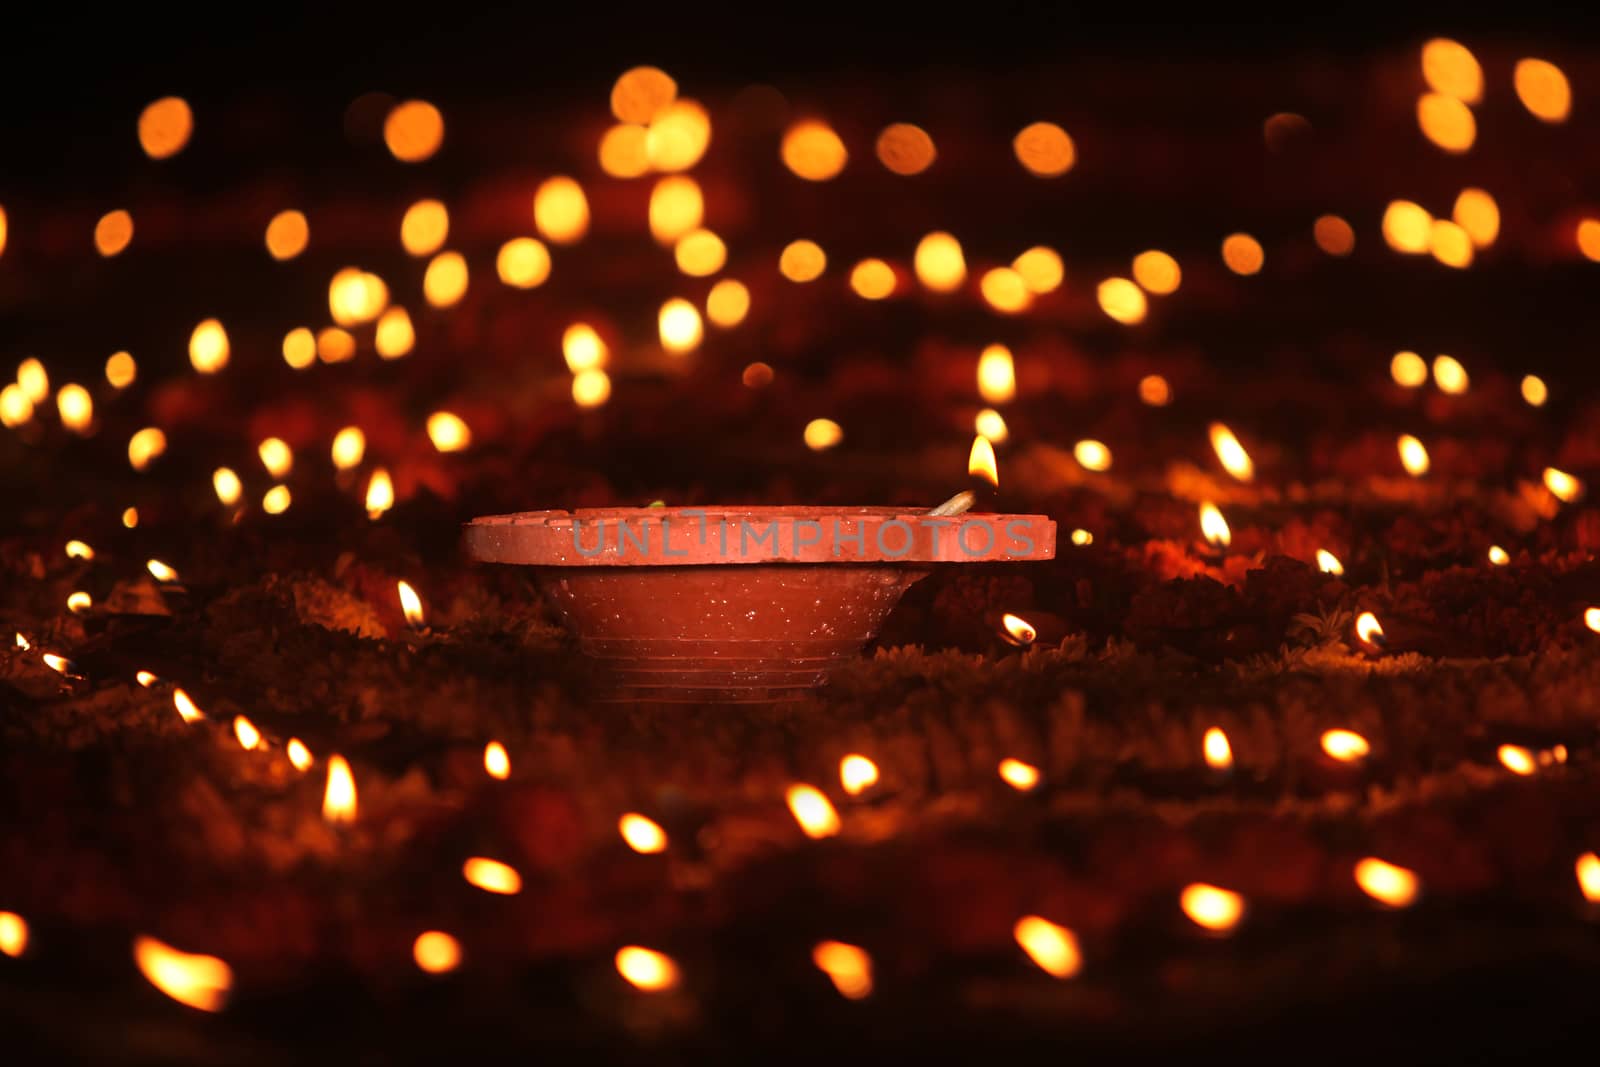 A Diwali earthen lamp kept in the center of marigold flowers and other small candles during a Hindu religious ritual, during Diwali festival in India.